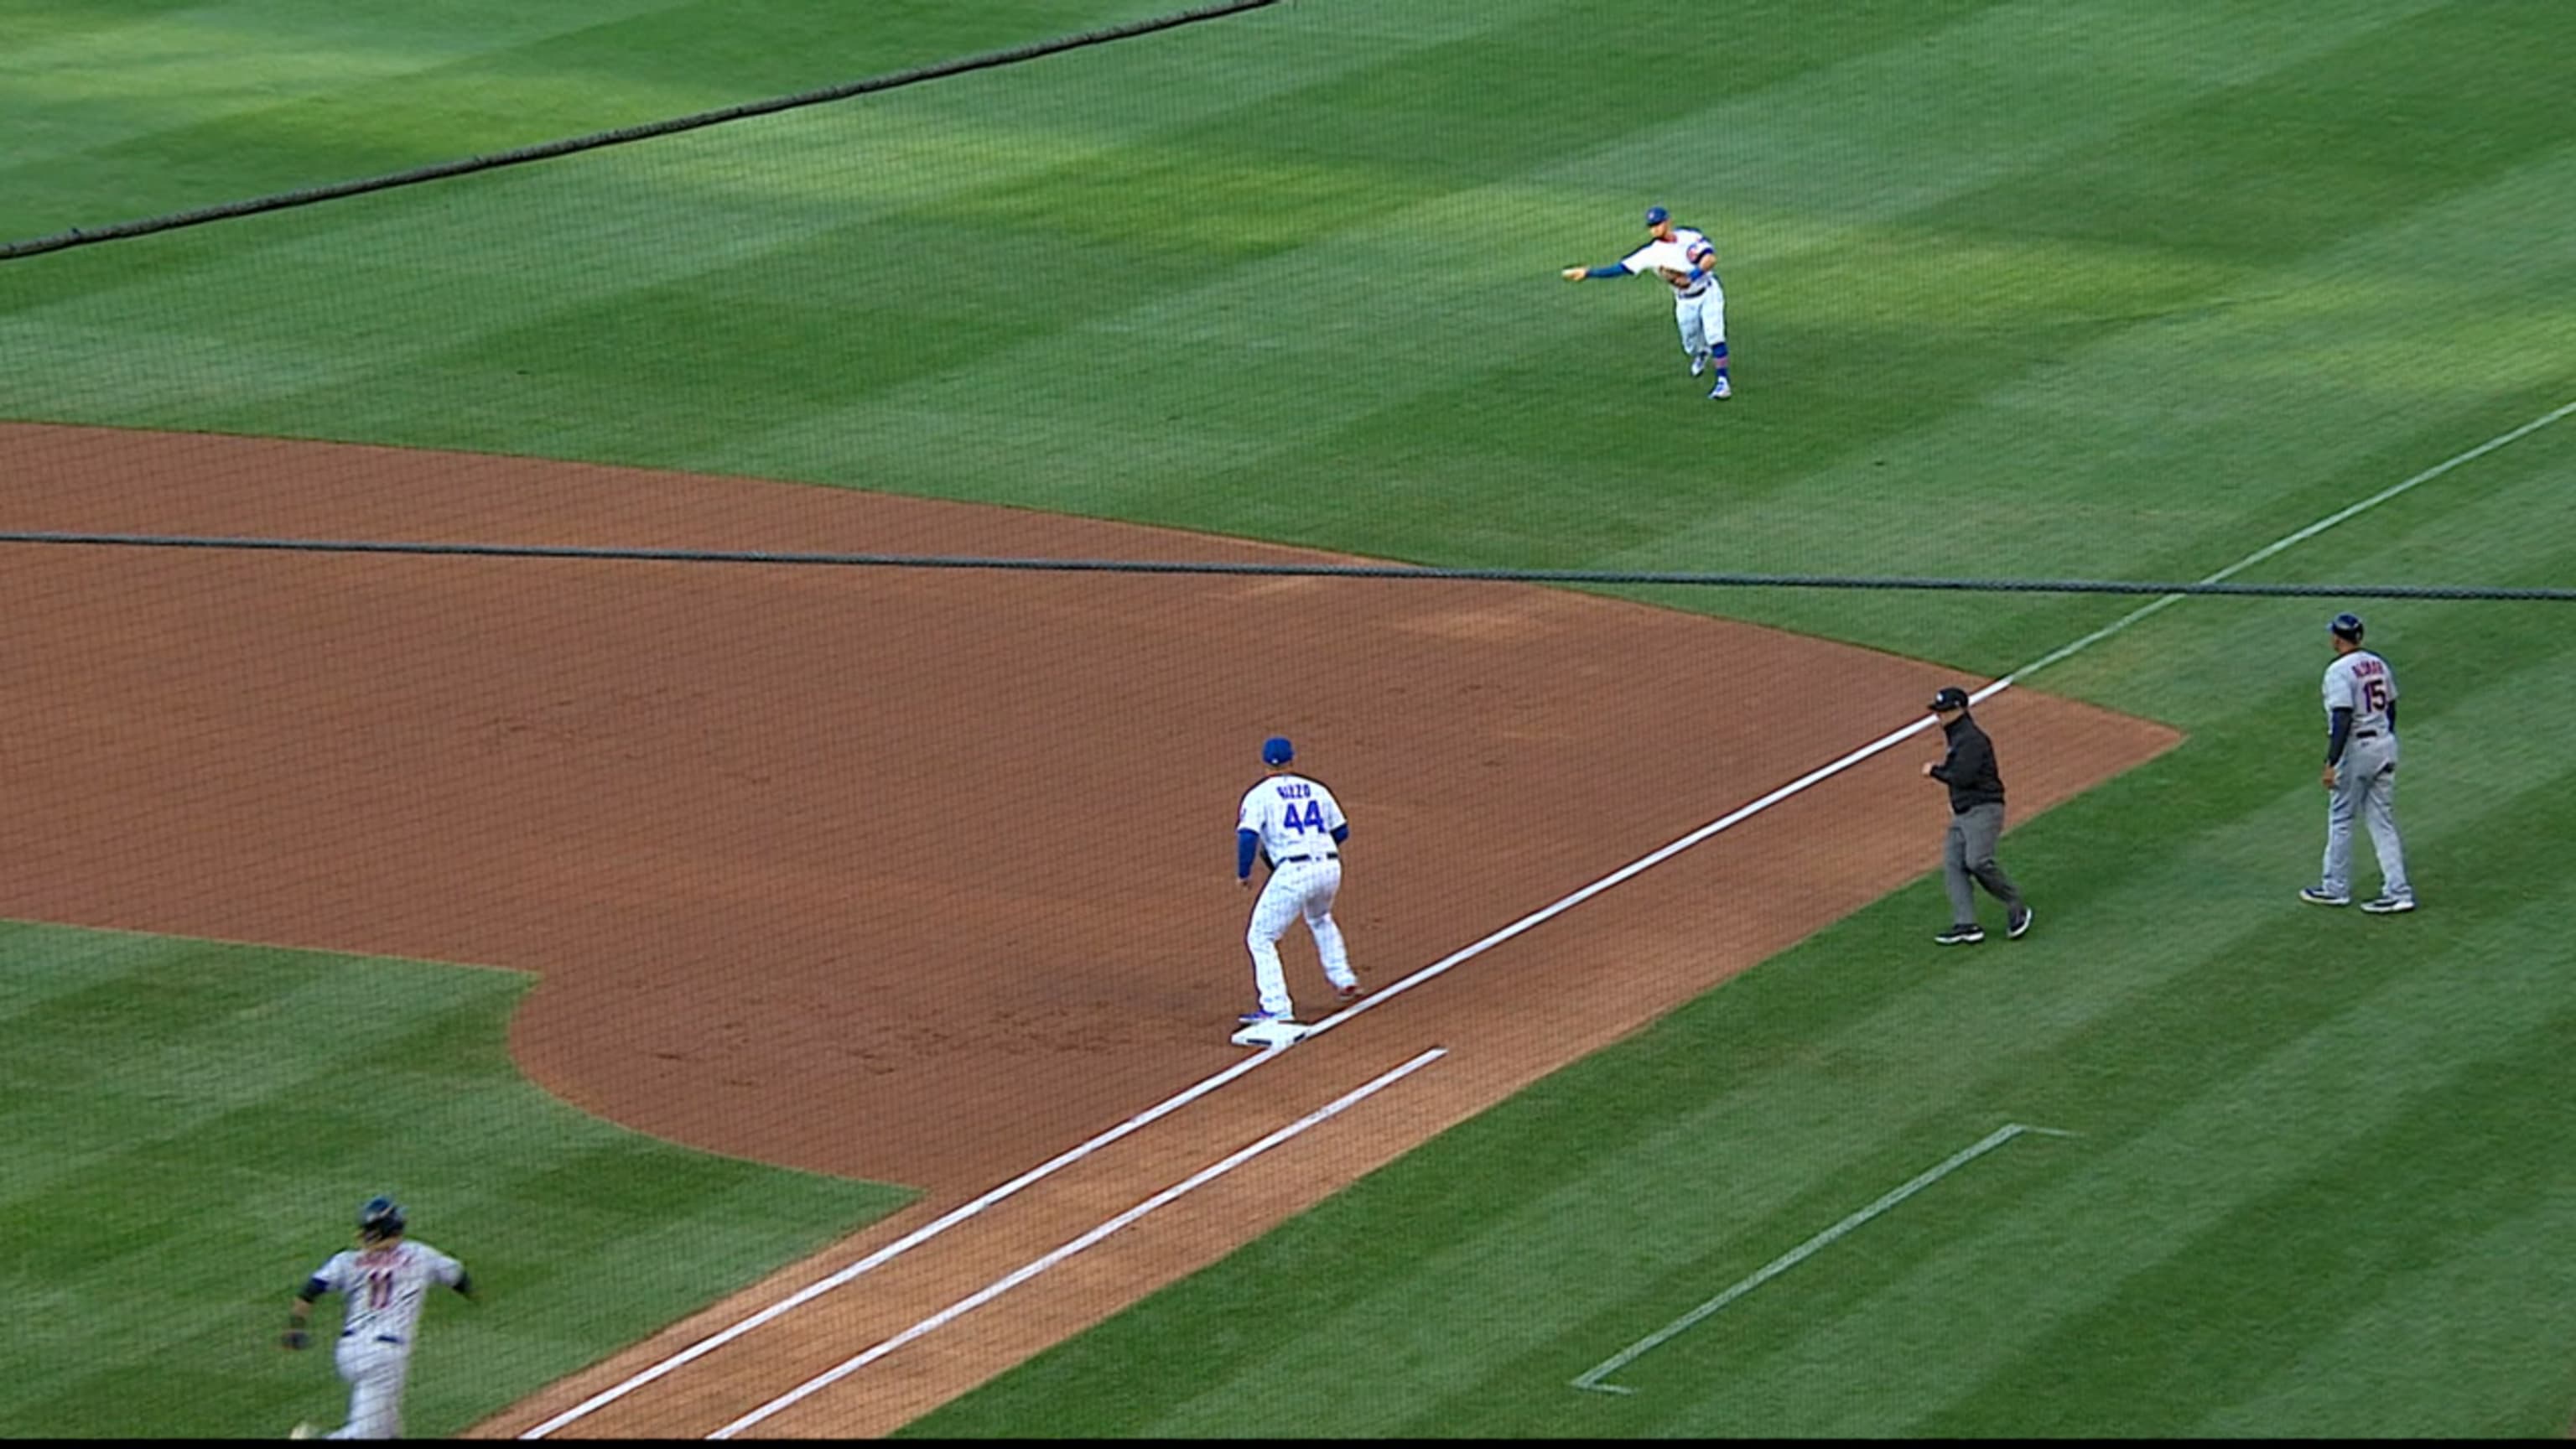 CHC@SF Gm4: Baez drops his gum, recovers to catch it 